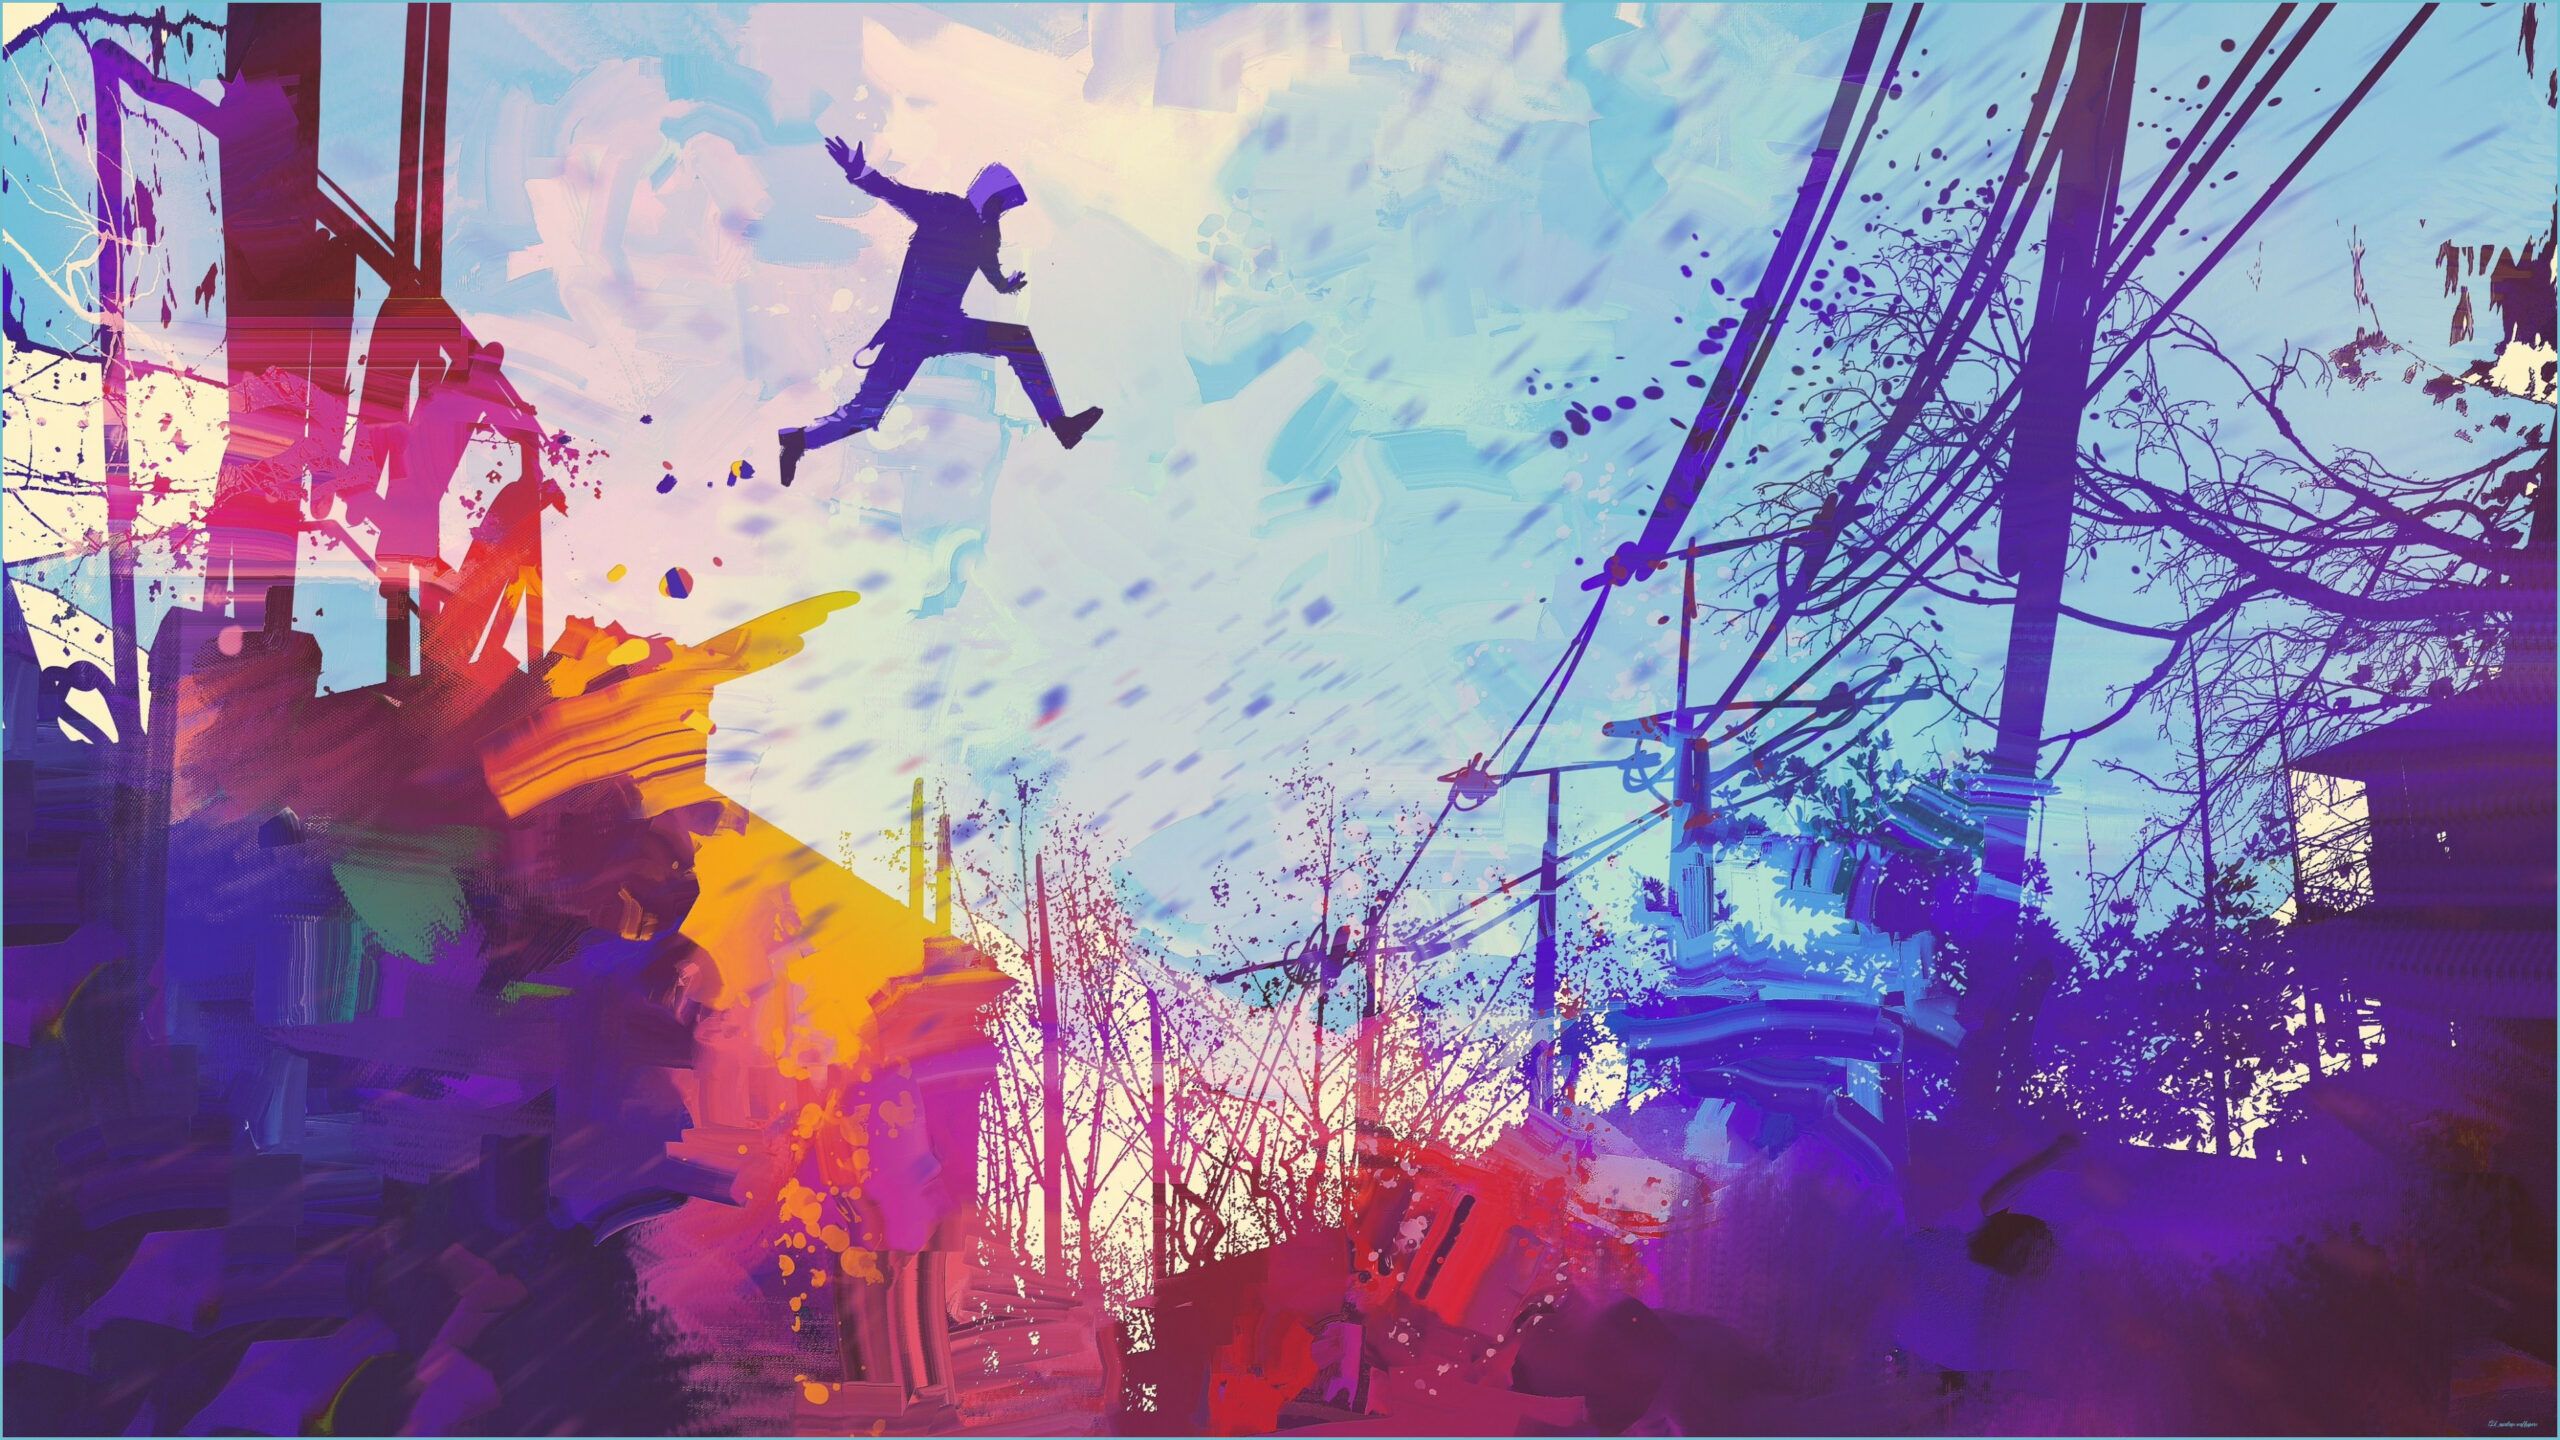 Man Jumping Roof Abstract Illustration Painting 14k Painting Paintings Wallpaper